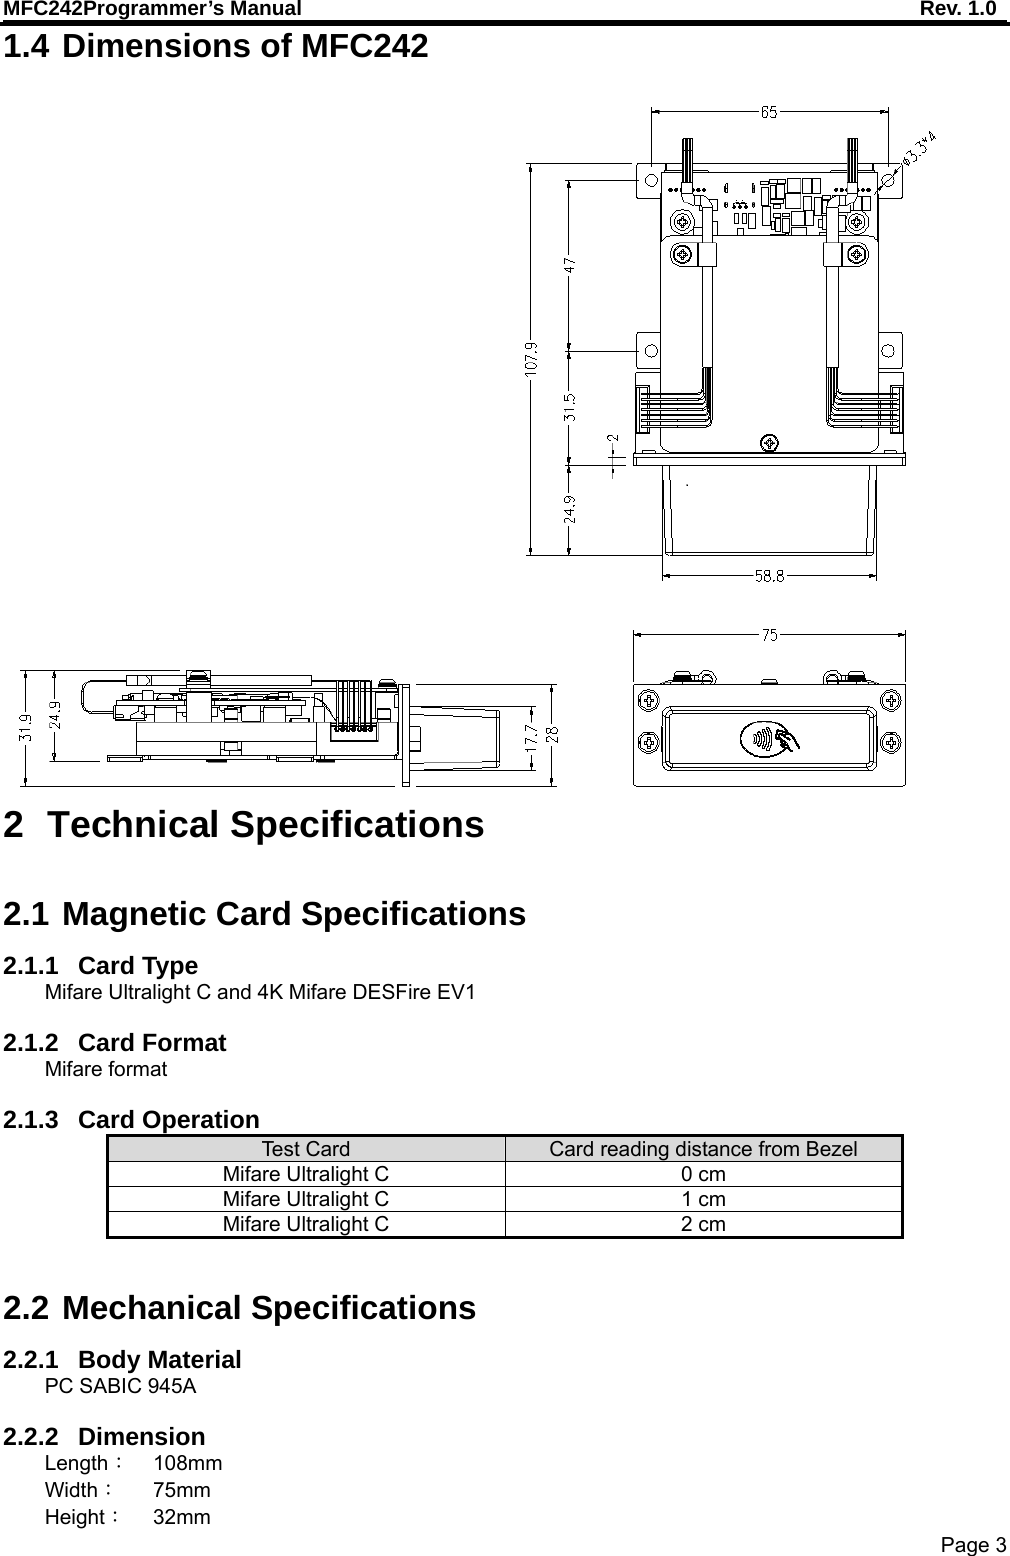 MFC242Programmer’s Manual    Rev. 1.0 Page 3 1.4 Dimensions of MFC242  2 Technical Specifications  2.1 Magnetic Card Specifications 2.1.1 Card Type Mifare Ultralight C and 4K Mifare DESFire EV1  2.1.2 Card Format Mifare format  2.1.3 Card Operation  Test C ar d   Card reading distance from Bezel Mifare Ultralight C  0 cm Mifare Ultralight C  1 cm Mifare Ultralight C  2 cm  2.2 Mechanical Specifications 2.2.1 Body Material PC SABIC 945A  2.2.2 Dimension Length： 108mm Width： 75mm Height： 32mm 